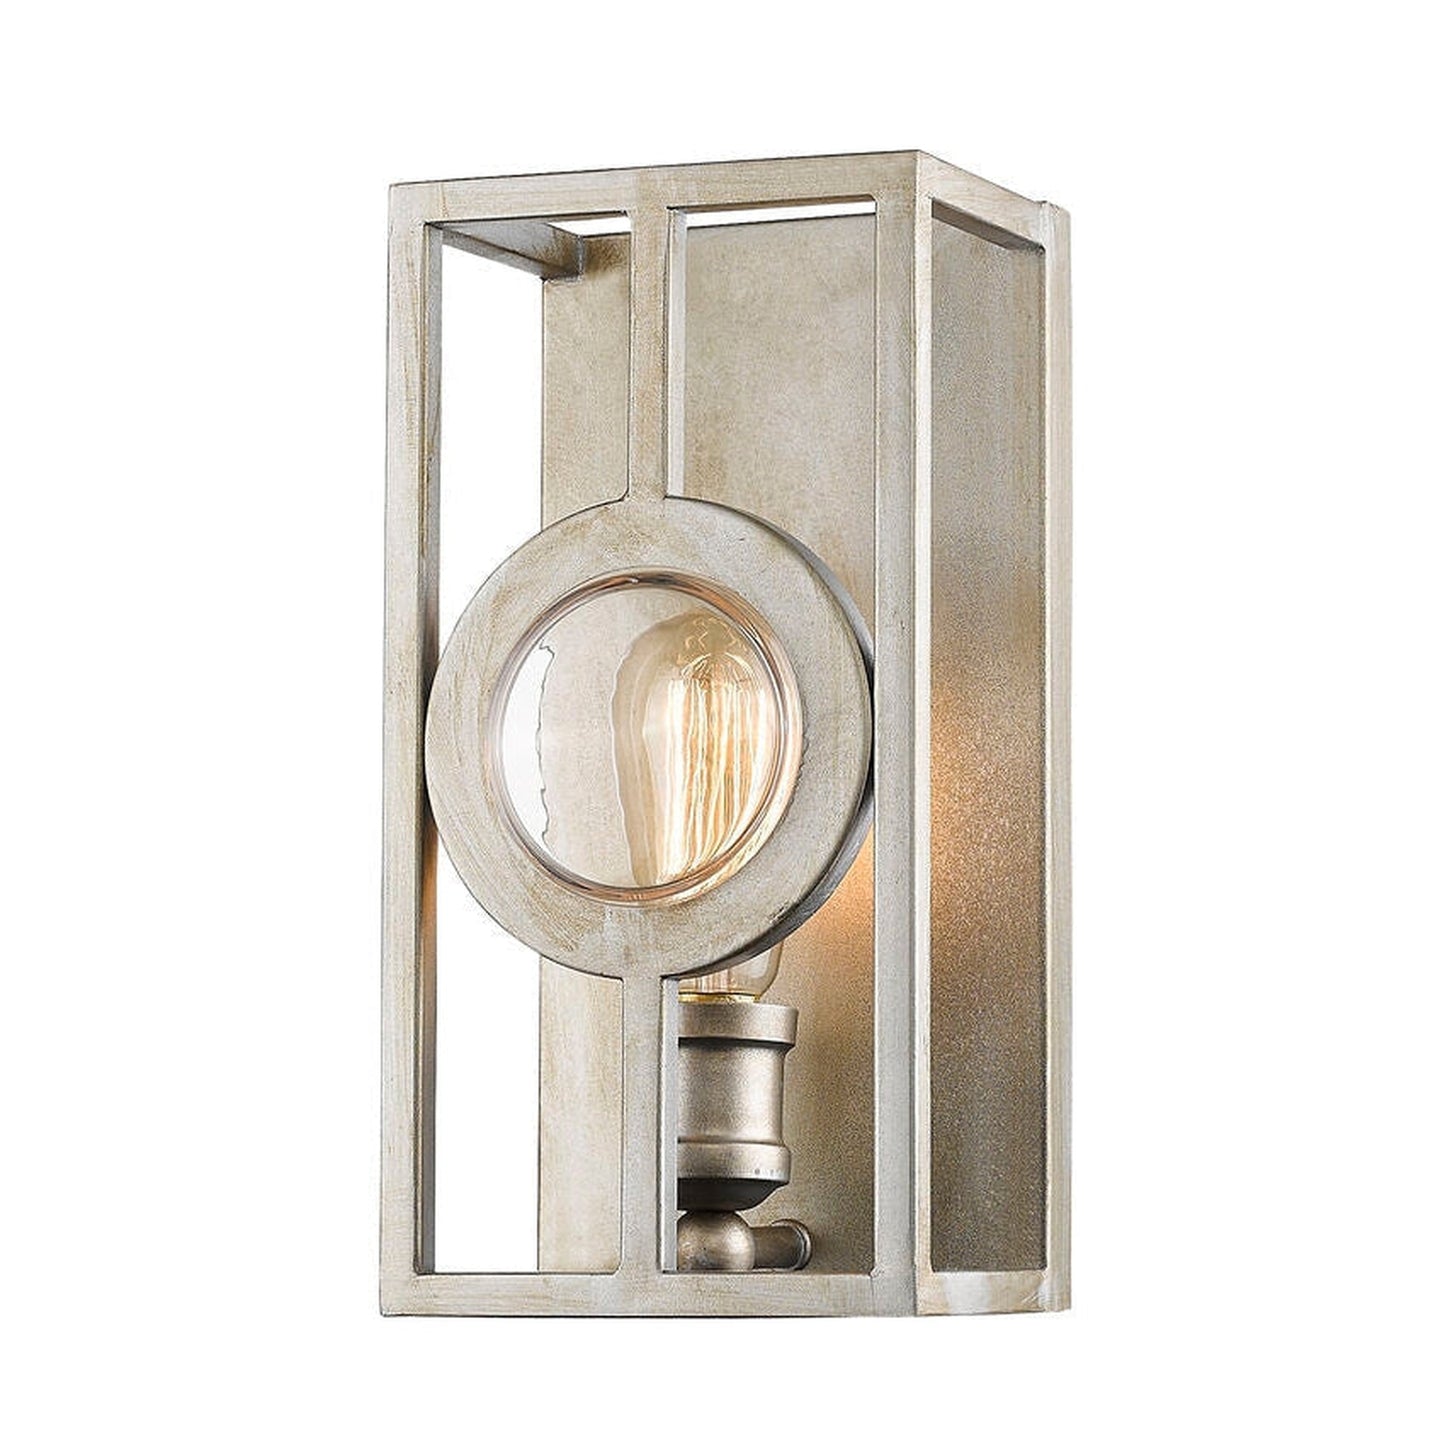 Z-Lite Port 6" 1-Light Antique Silver Shade Wall Sconce With Antique Silver Frame Finish